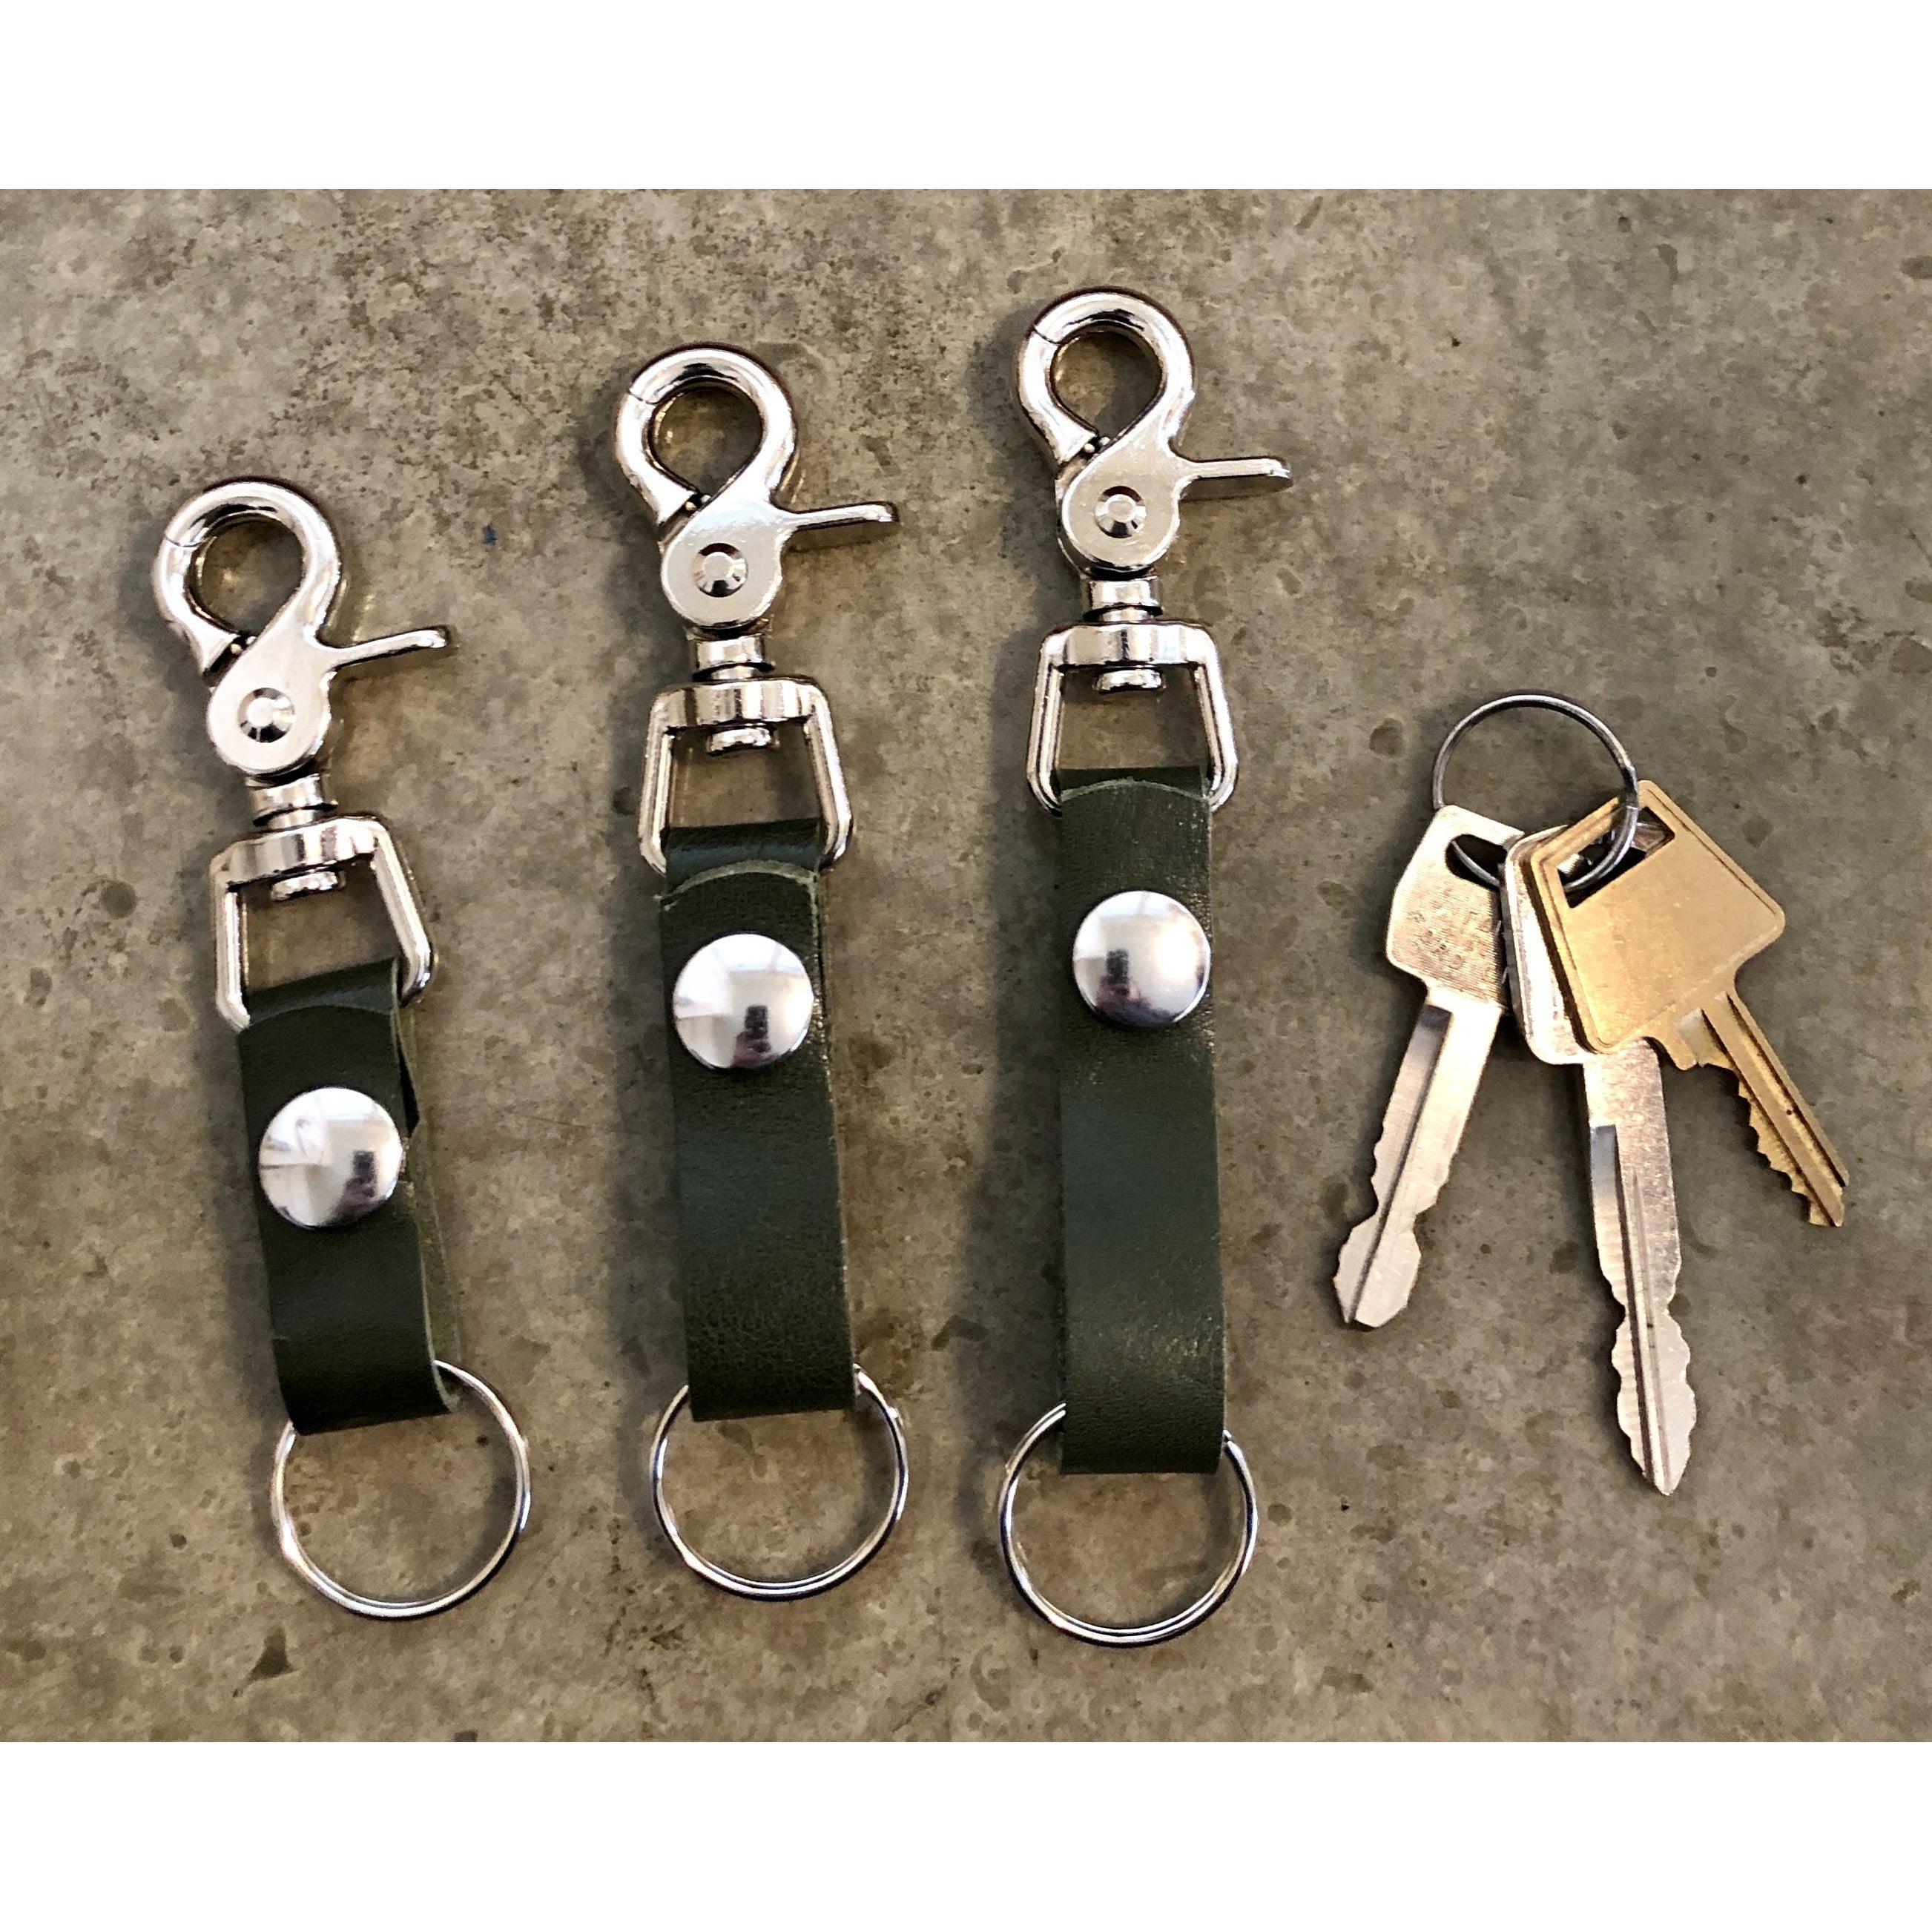 The Perfect Leather Belt Loop Key Chain, in forest green, short, medium, and long